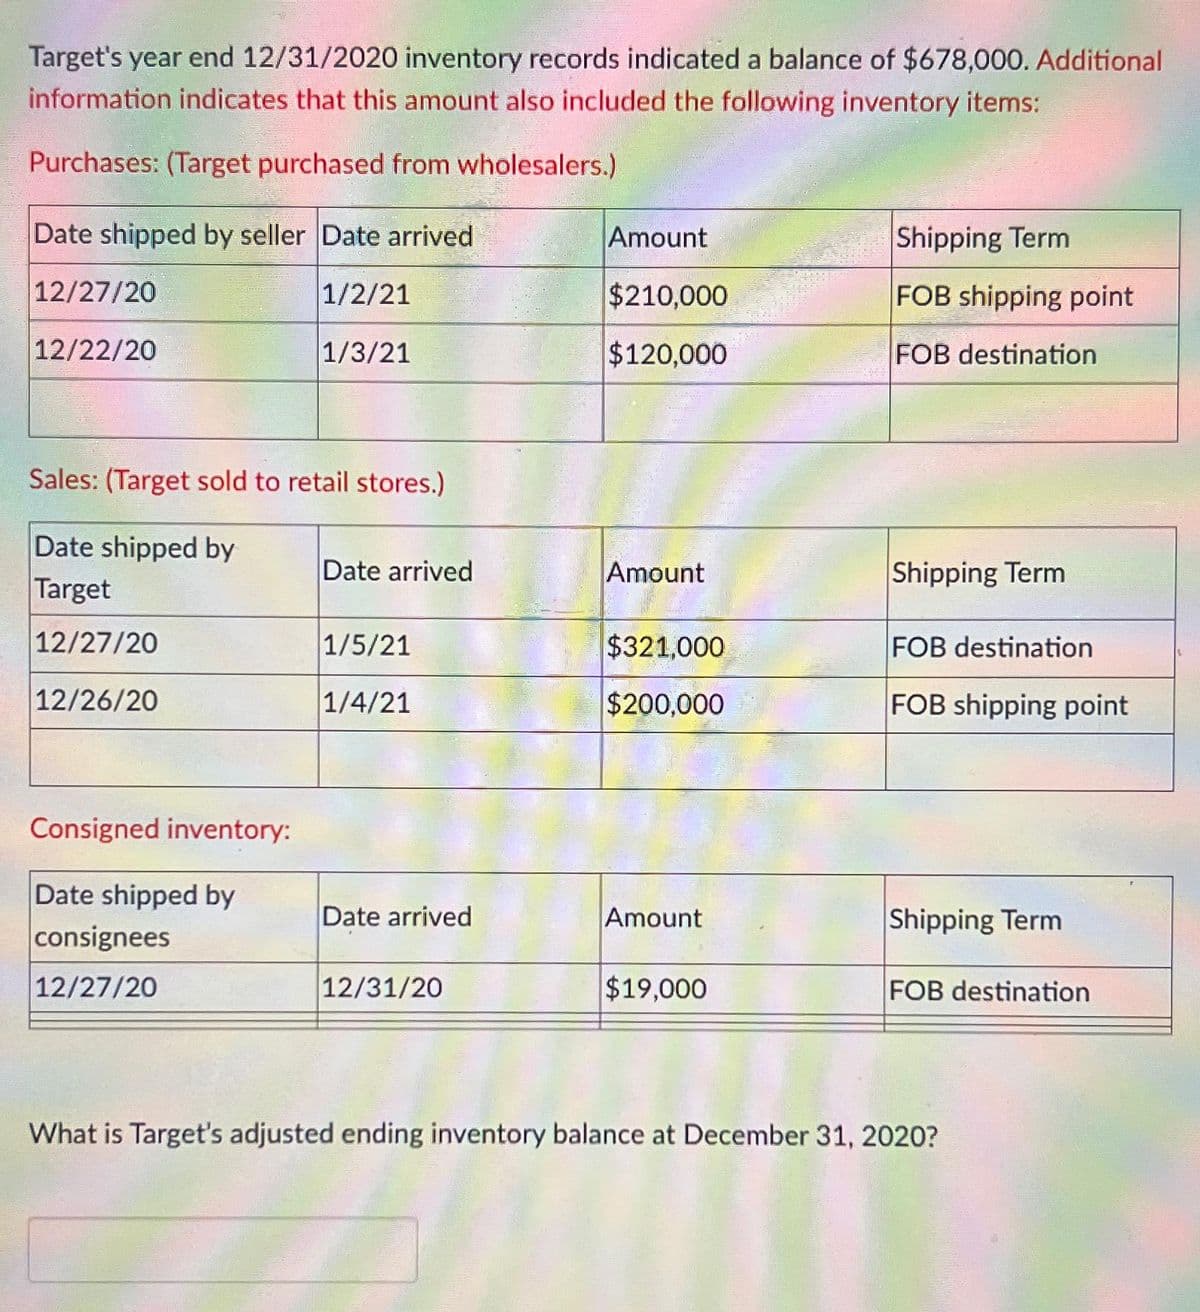 Target's year end 12/31/2020 inventory records indicated a balance of $678,000. Additional
information indicates that this amount also included the following inventory items:
Purchases: (Target purchased from wholesalers.)
Date shipped by seller Date arrived
1/2/21
1/3/21
12/27/20
12/22/20
Sales: (Target sold to retail stores.)
Date shipped by
Target
12/27/20
12/26/20
Consigned inventory:
Date shipped by
consignees
12/27/20
Date arrived
1/5/21
1/4/21
Date arrived
12/31/20
Amount
$210,000
$120,000
Amount
$321,000
$200,000
Amount
$19,000
Shipping Term
FOB shipping point
FOB destination
Shipping Term
FOB destination
FOB shipping point
Shipping Term
FOB destination
What is Target's adjusted ending inventory balance at December 31, 2020?